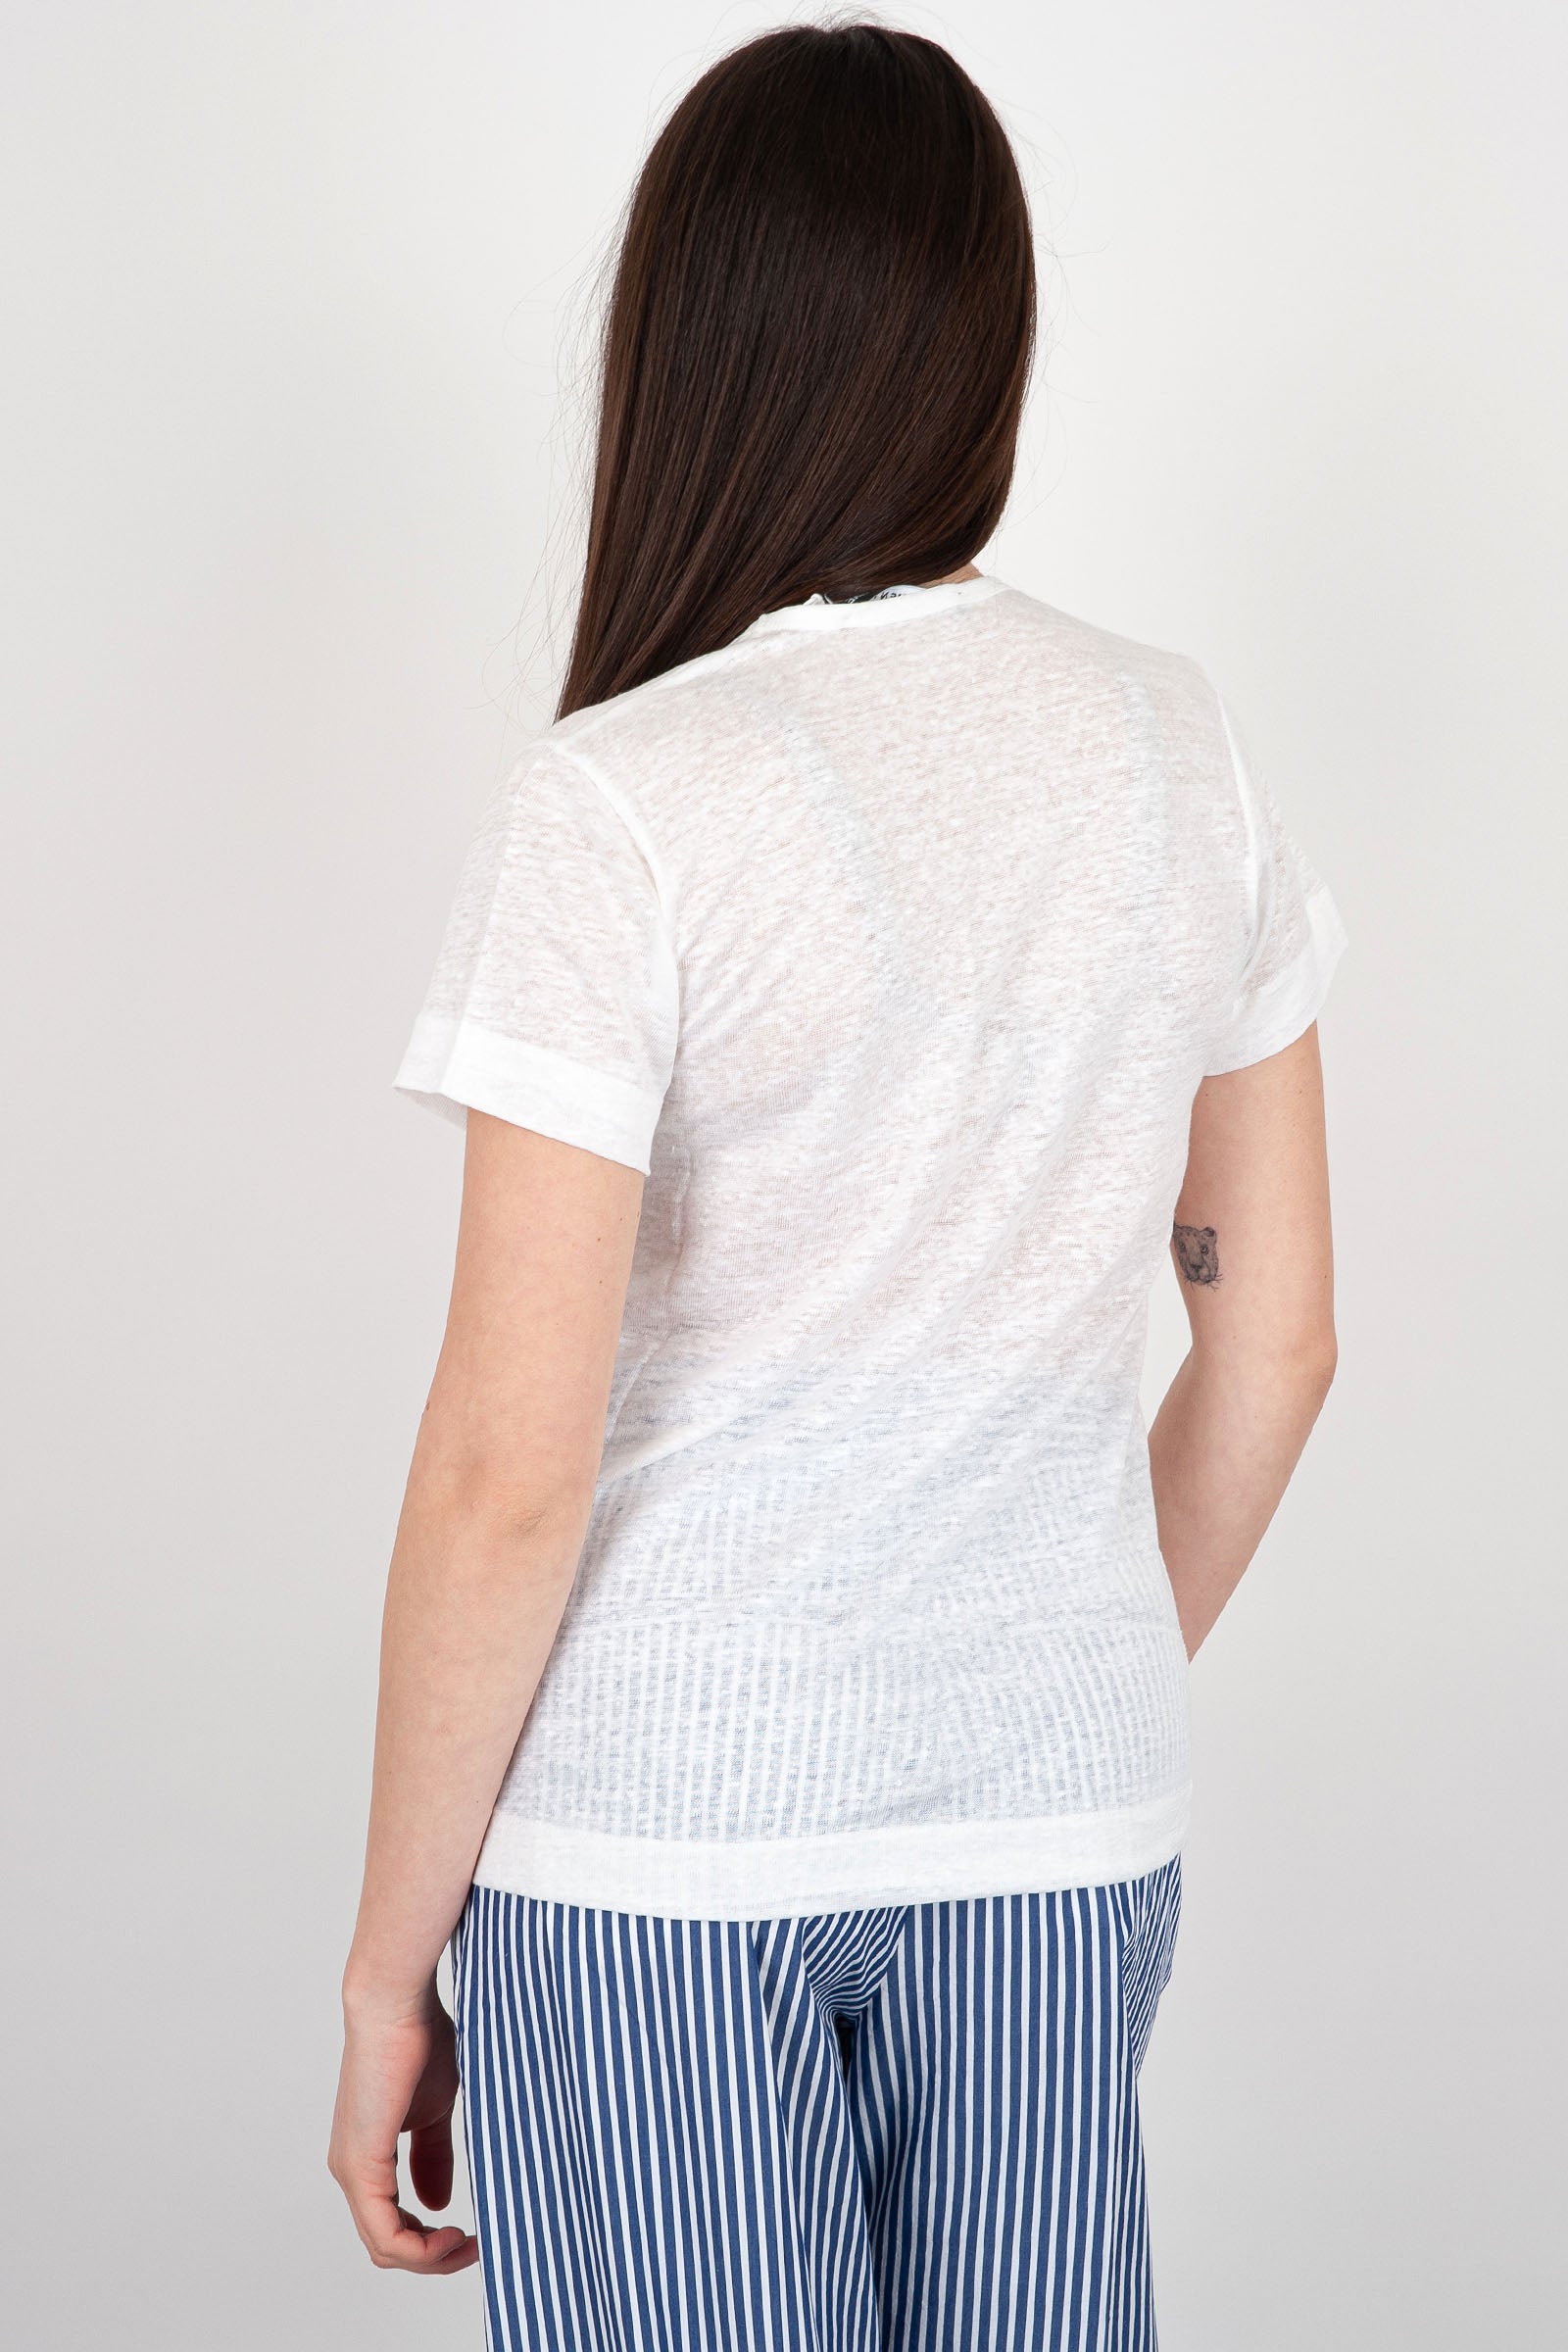 Department Five T-Shirt Doheny Linen White - 4